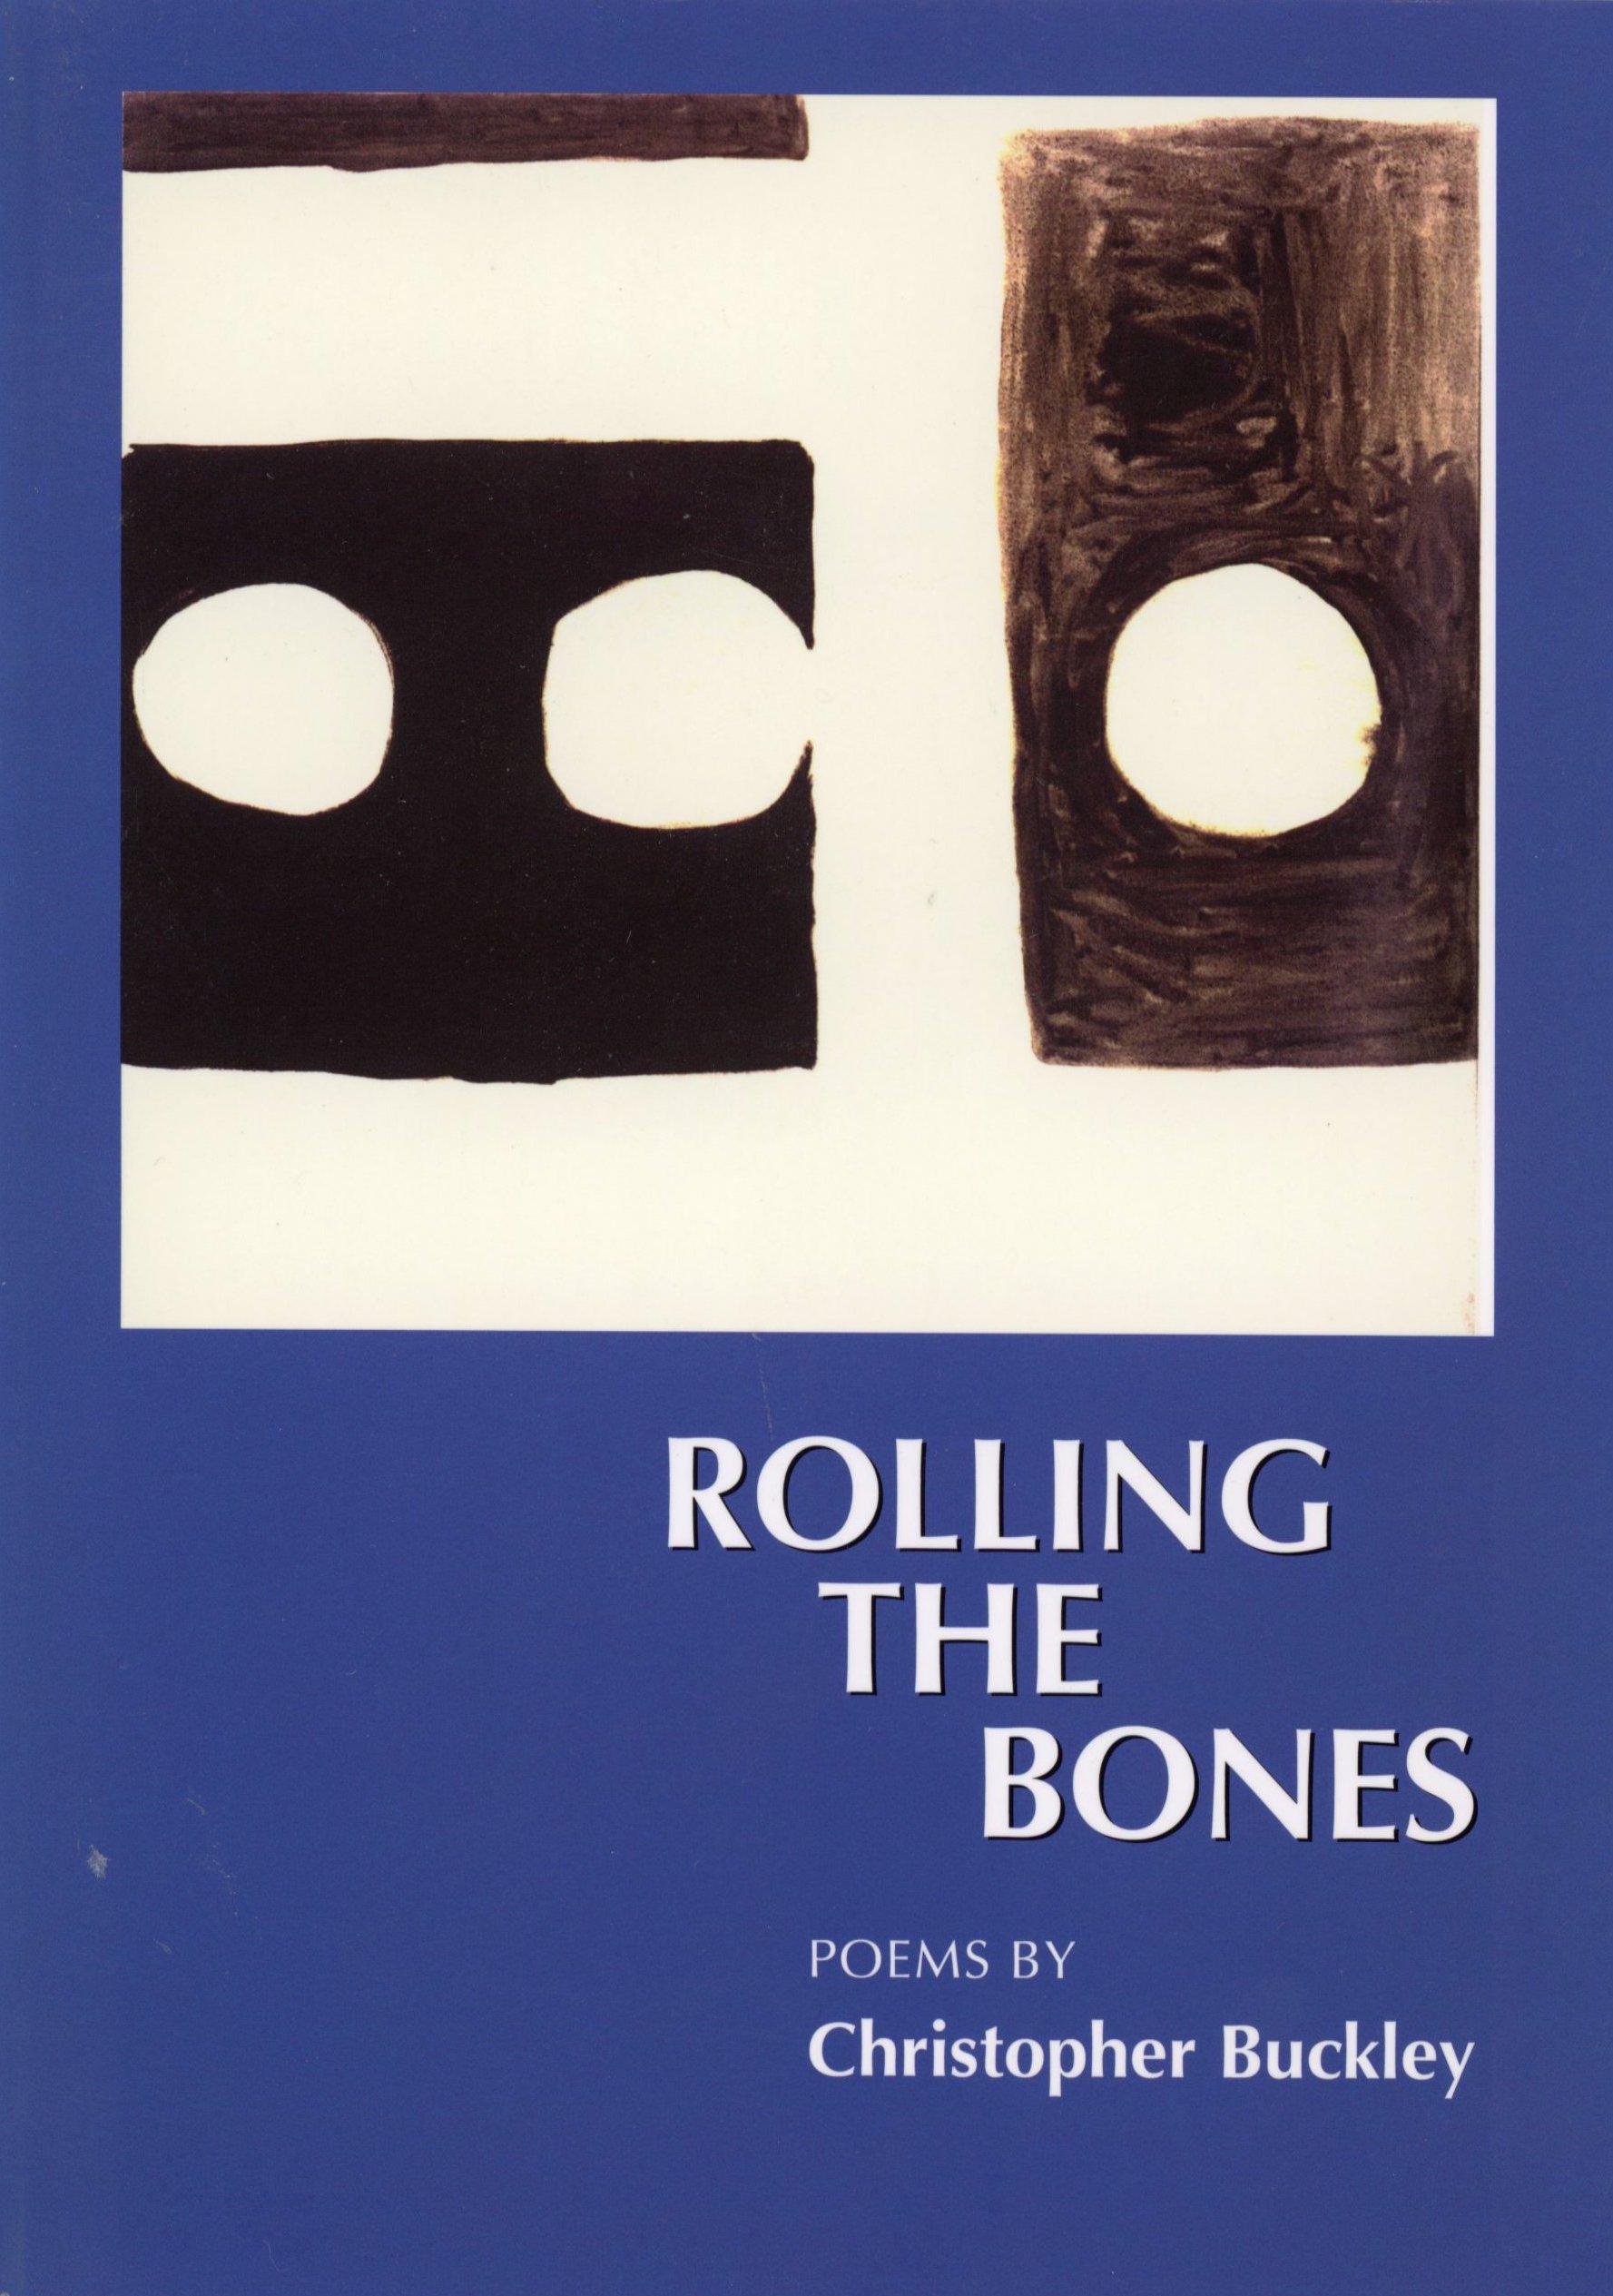 Image of the front cover of Rolling the Bones.